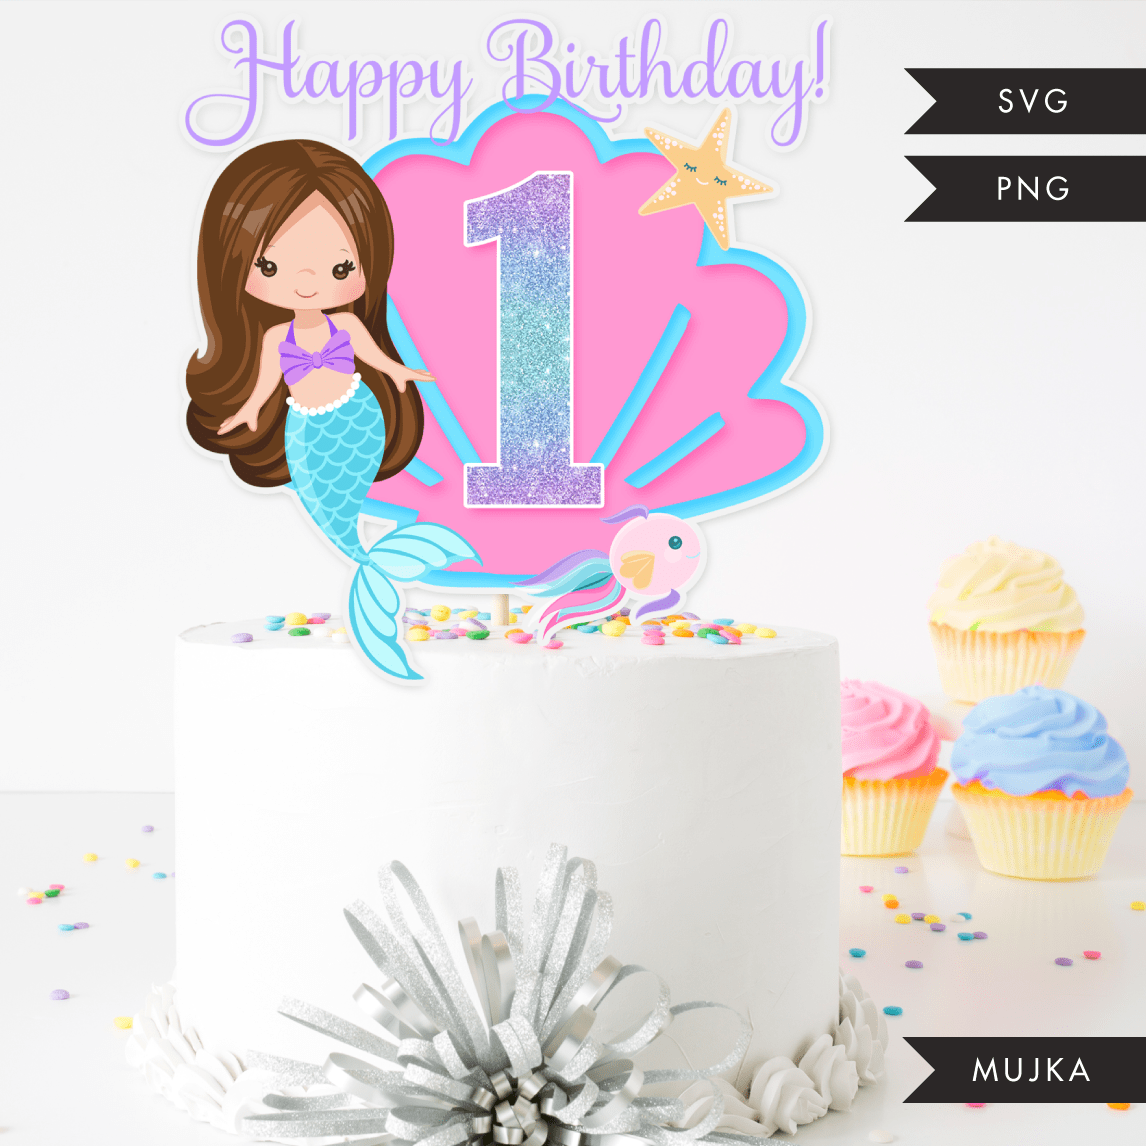 Mermaid Birthday Numbers Cake toppers SVG, PNG cutting files and clipart. Brunette Rainbow mermaid graphics for Cricut, Silhouette